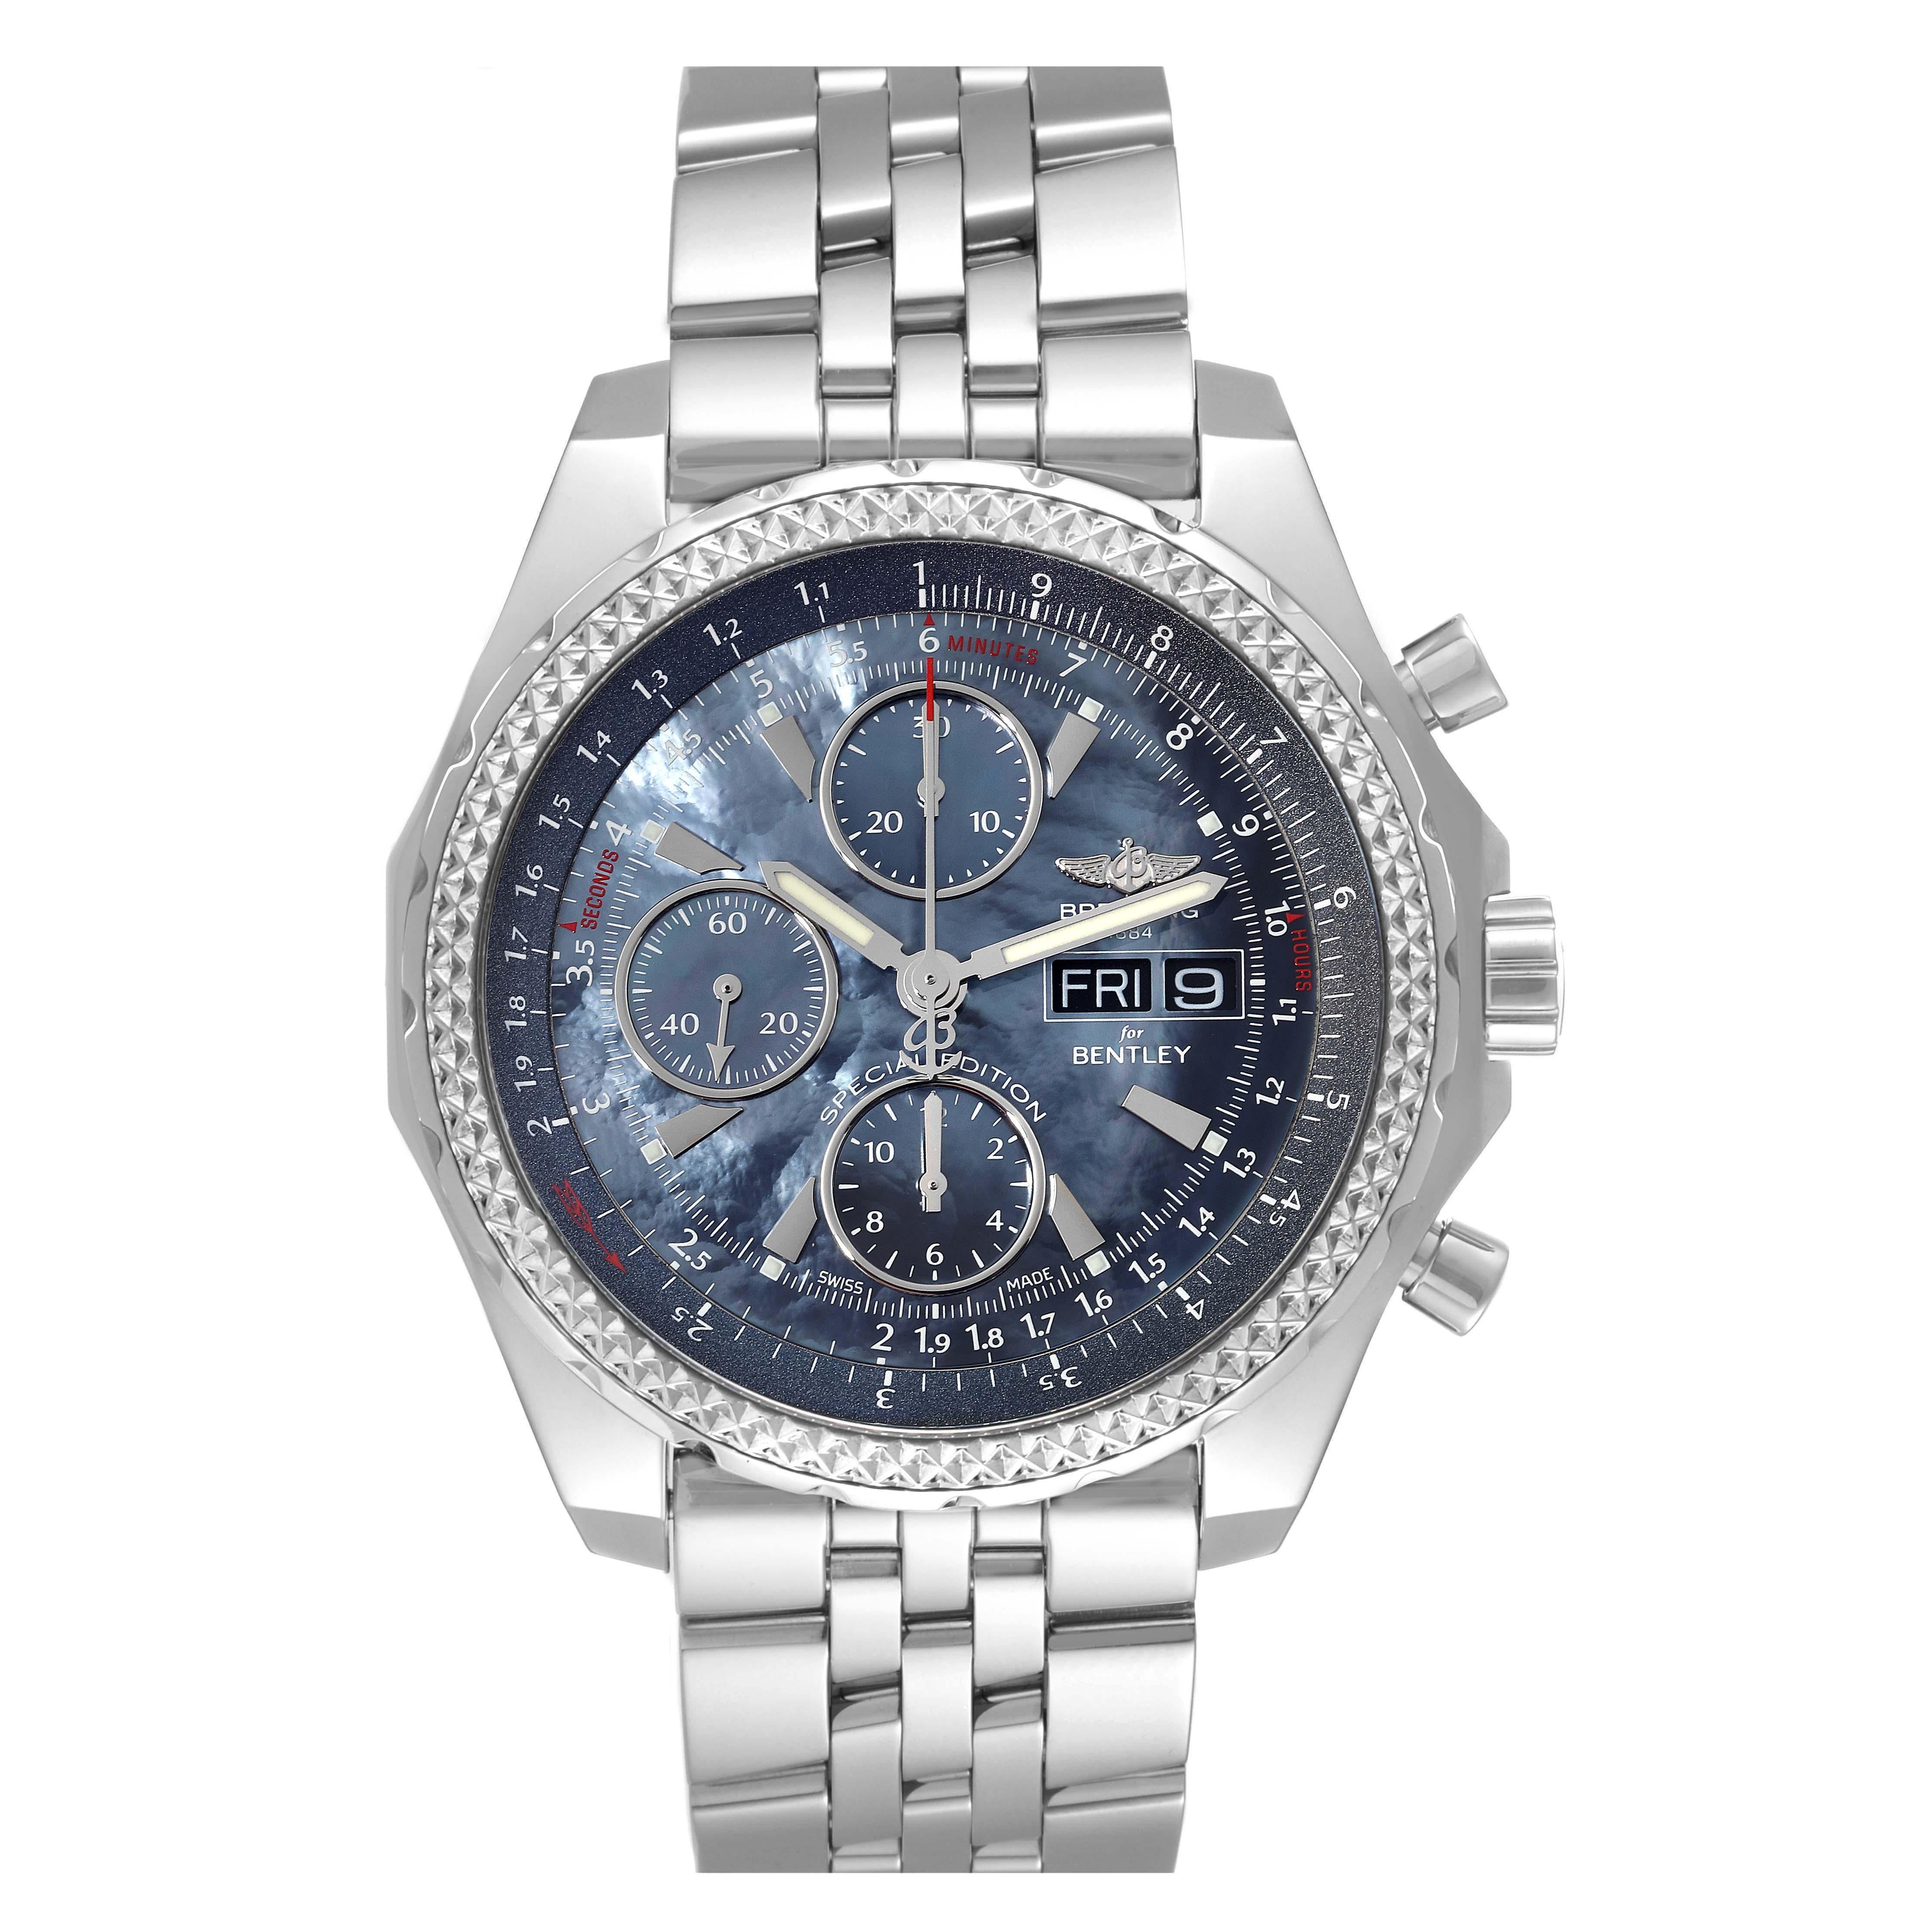 Breitling Bentley Motors GT Blue MOP Dial Steel Mens Watch A13362 Box Card. Self-winding automatic officially certified chronometer movement. Chronograph function. Stainless steel case 44.8 mm in diameter. Stainless steel crown and pushers. Screw